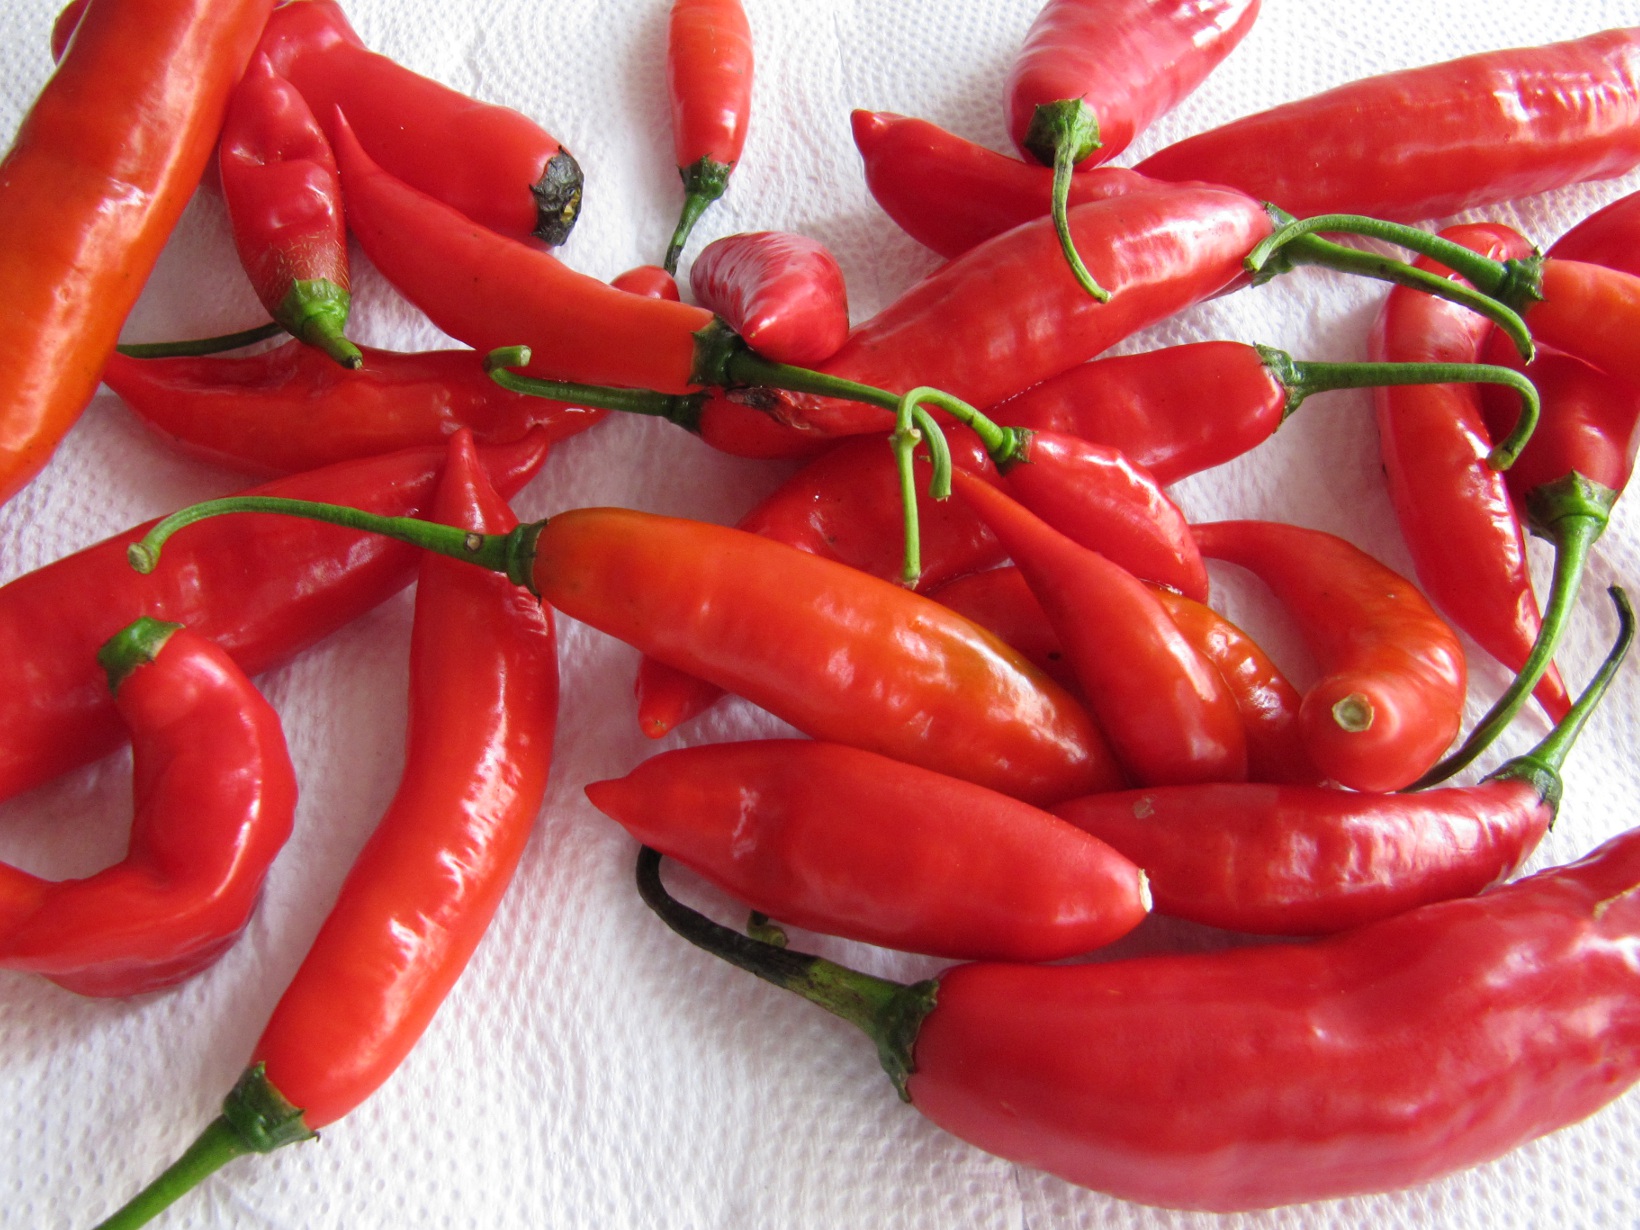 File:Red Peppers.jpeg - Wikimedia Commons